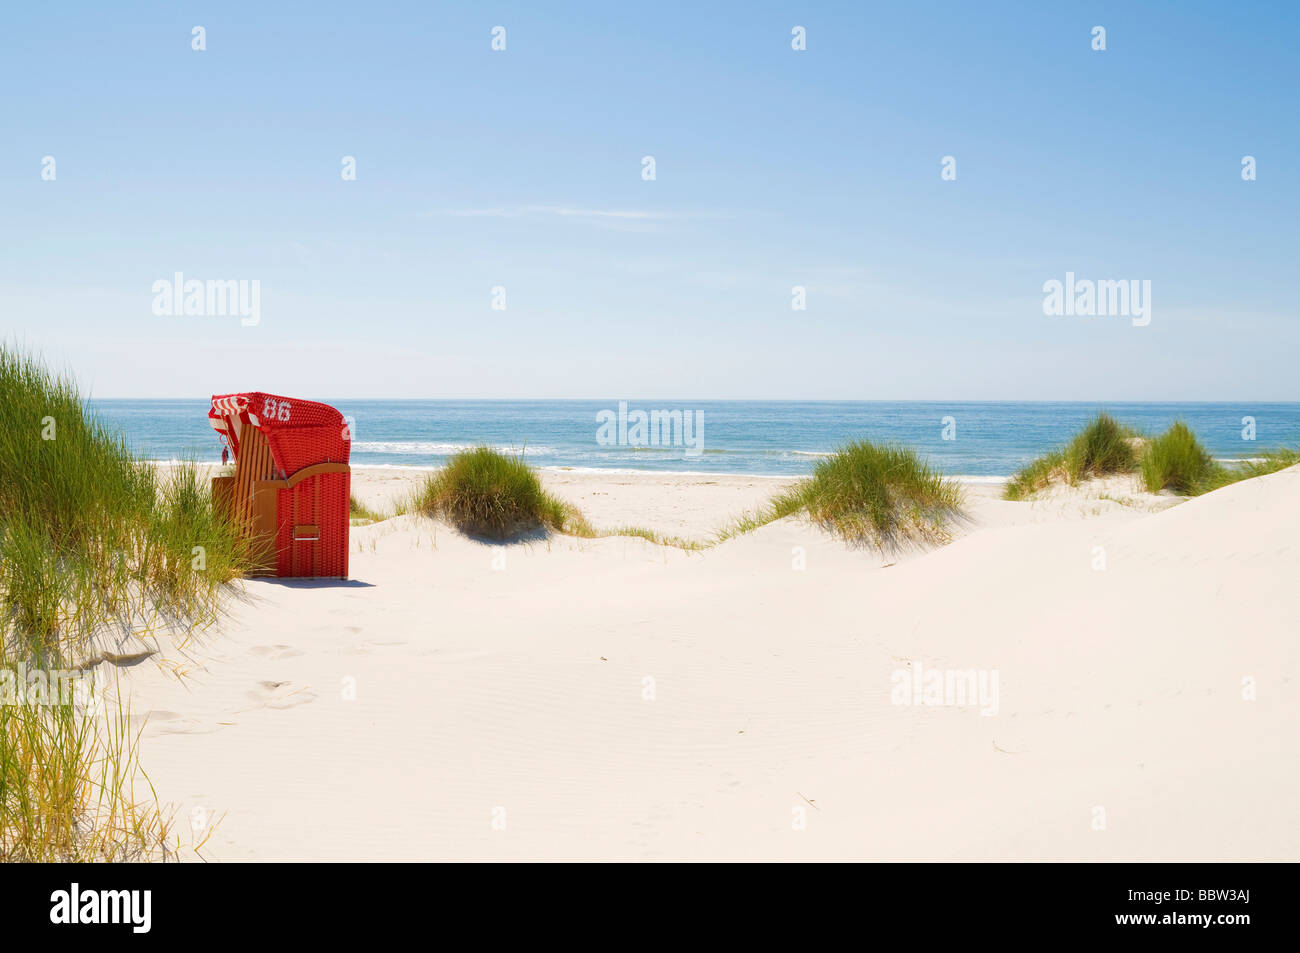 Red beach chair in the dunes and blue sky, Amrum, North Sea, Germany, Europe Stock Photo